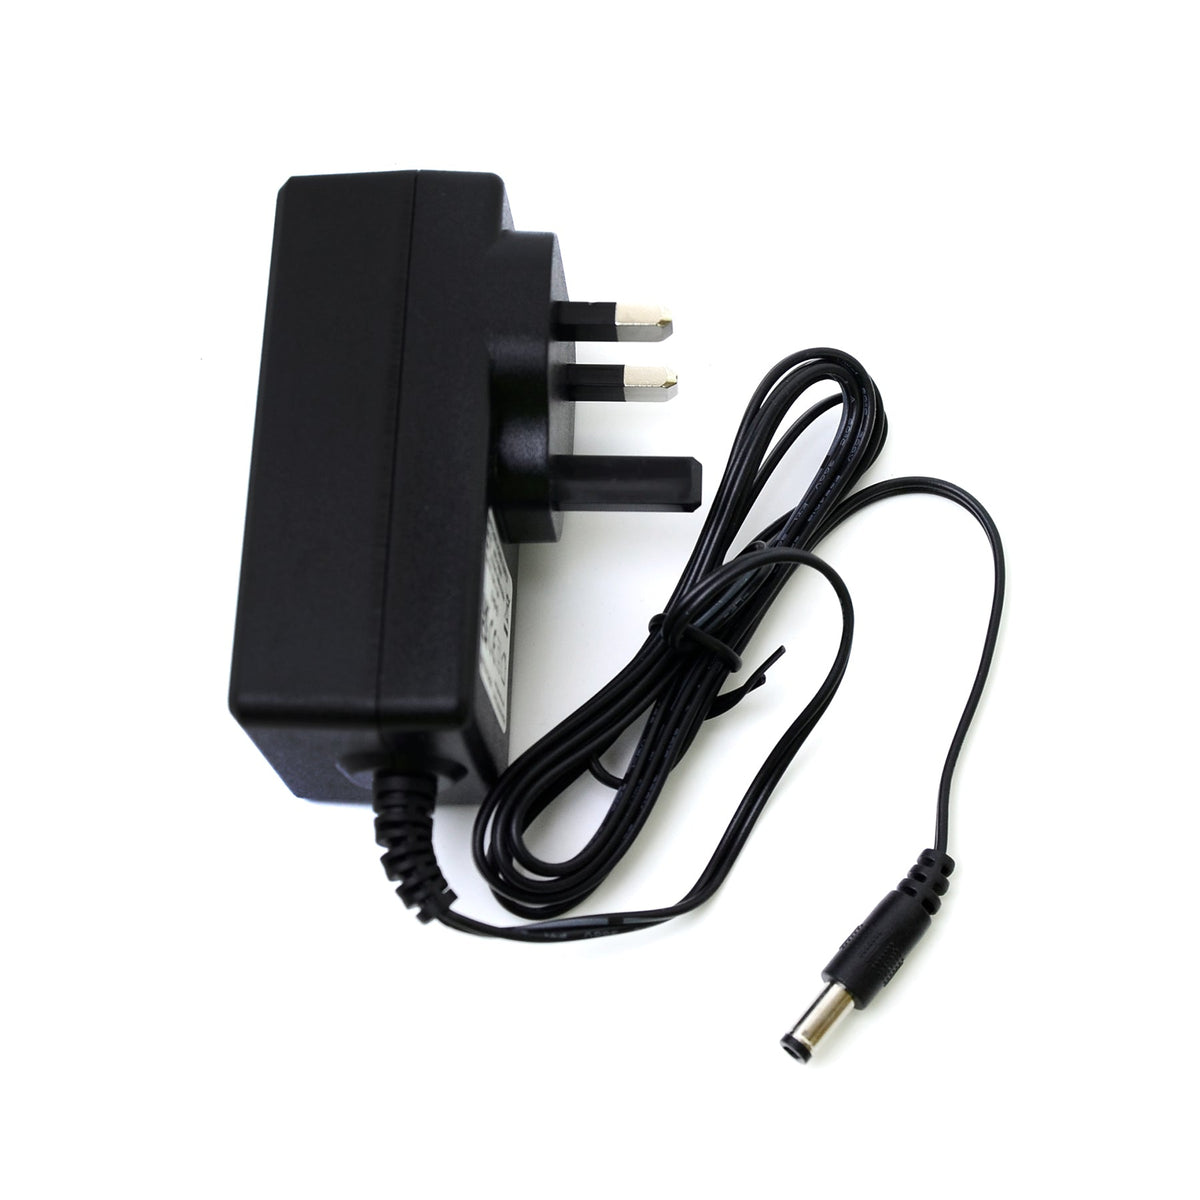 DiodeDrive® Desktop AC Power Adapter - 12 VDC Switching Power Supply -  60W-120W